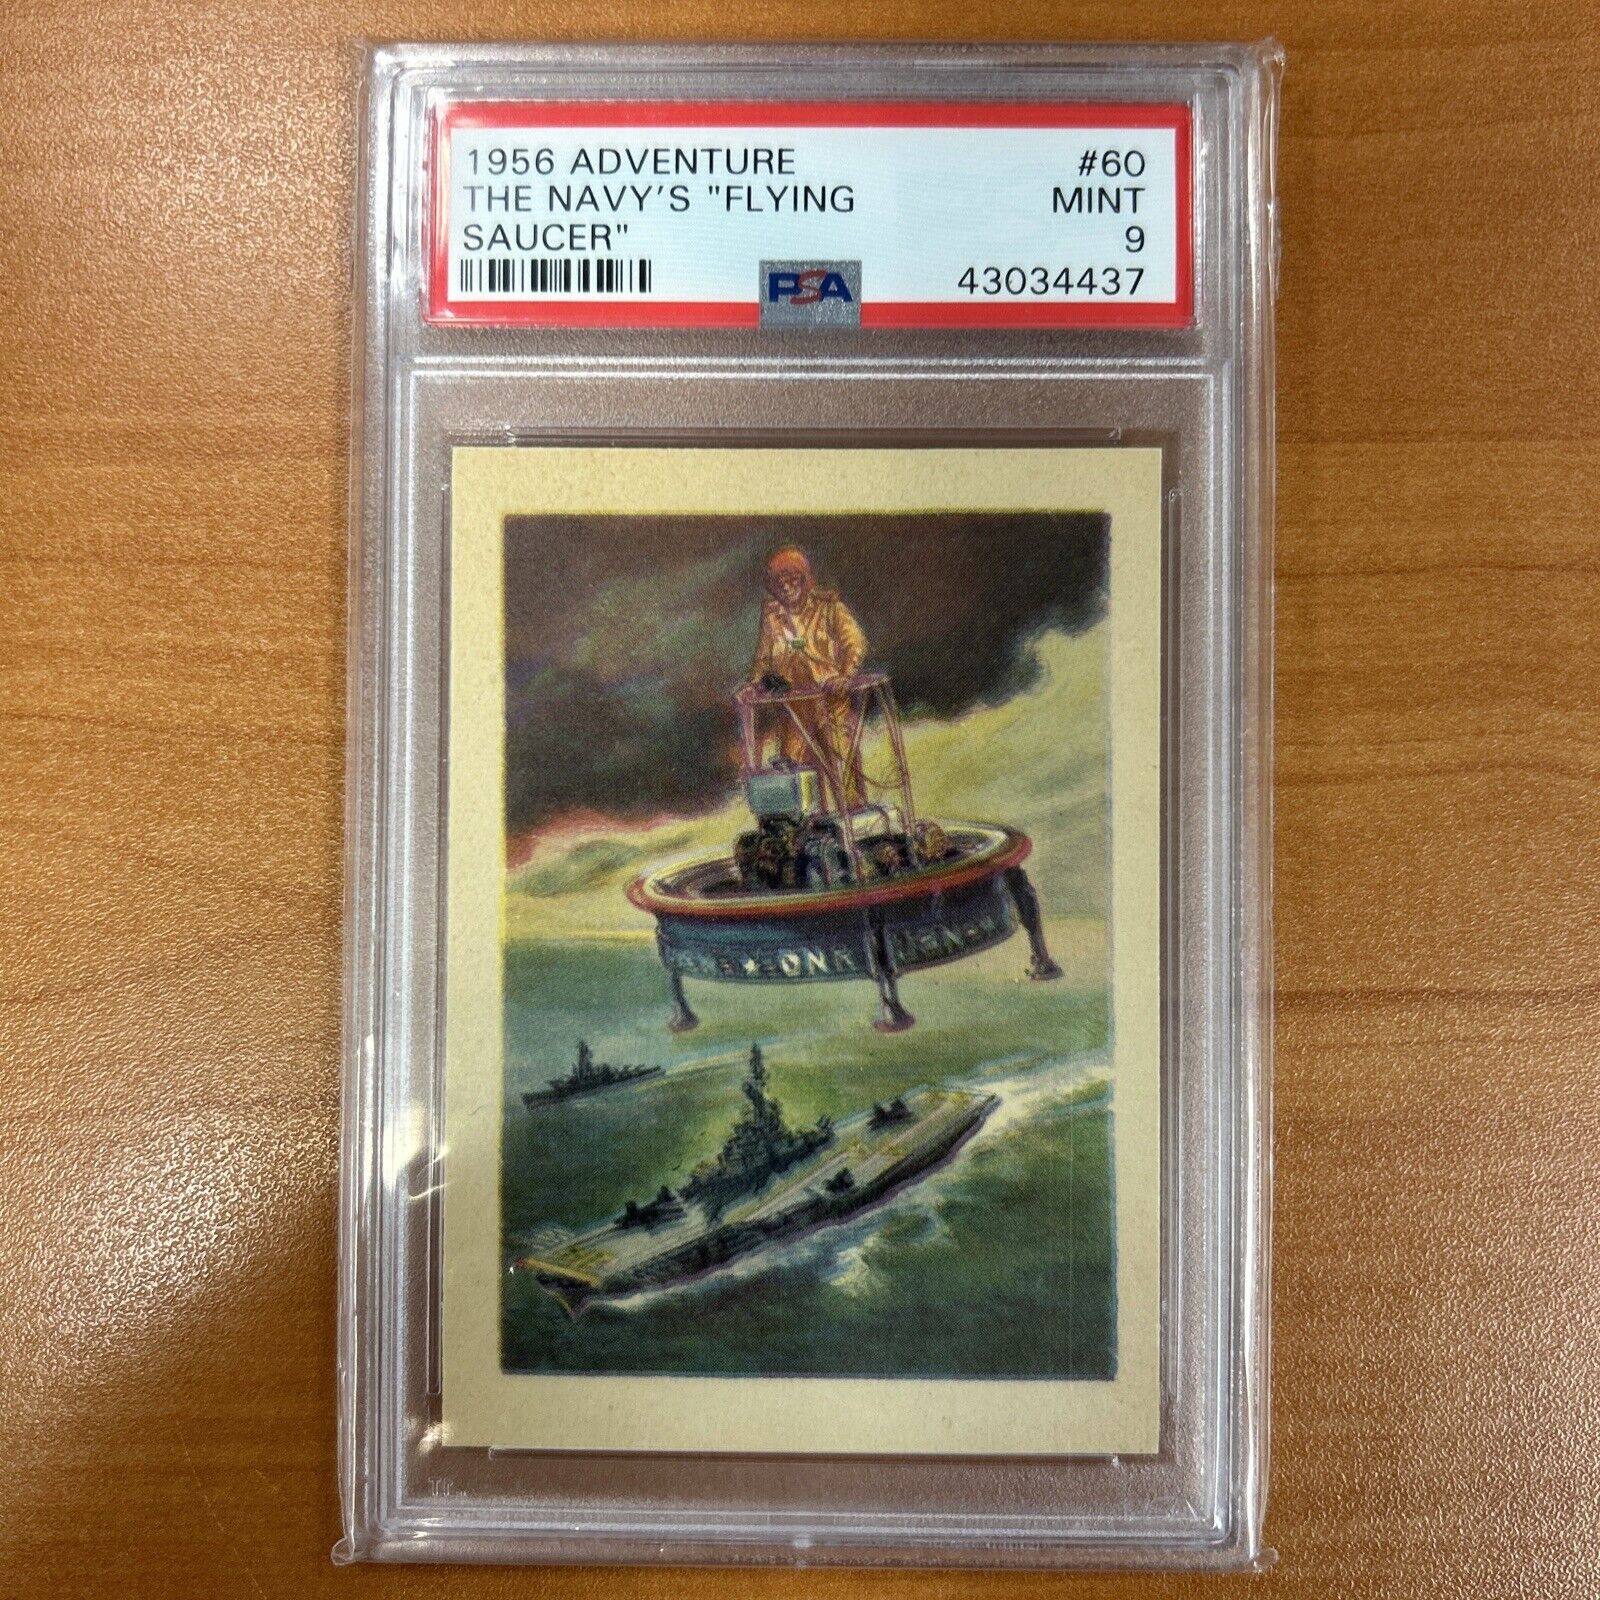 Rare Vintage 1956 Topps ADVENTURE THE NAVY'S FLYING SAUCER #60 PSA 9 MINT Pop 40